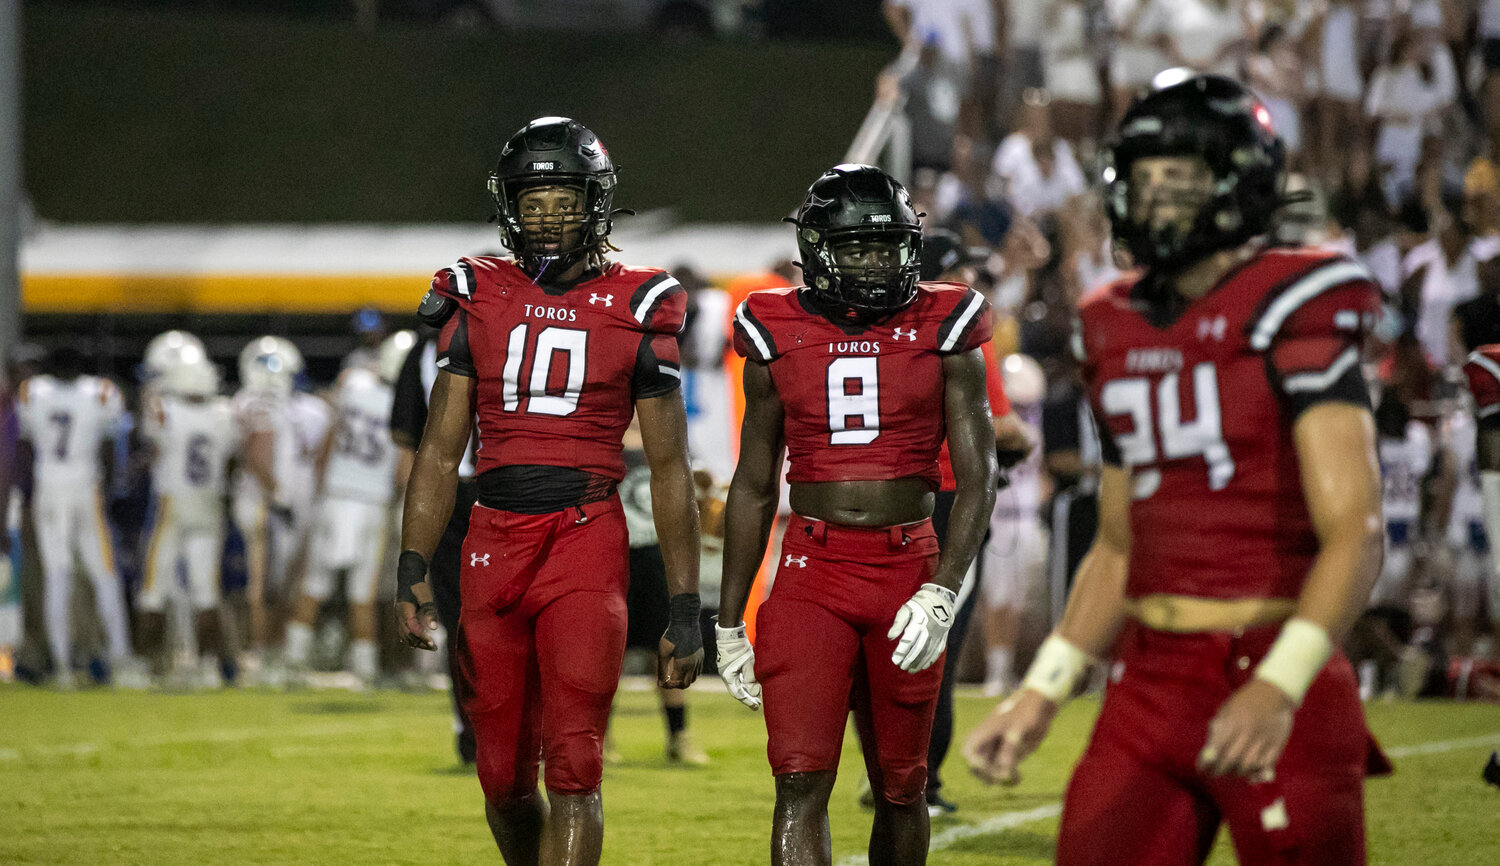 Spanish Fort’s Sterling Dixon (10), Javonte Walton (8), Newton Gardner (24) and the Toro defense come to the sideline for a heat timeout during Aug. 24’s season-opening contest against the Fairhope Pirates at home. Dixon was recently named to the High School Butkus Award watch list alongside the top linebackers from 19 different states.